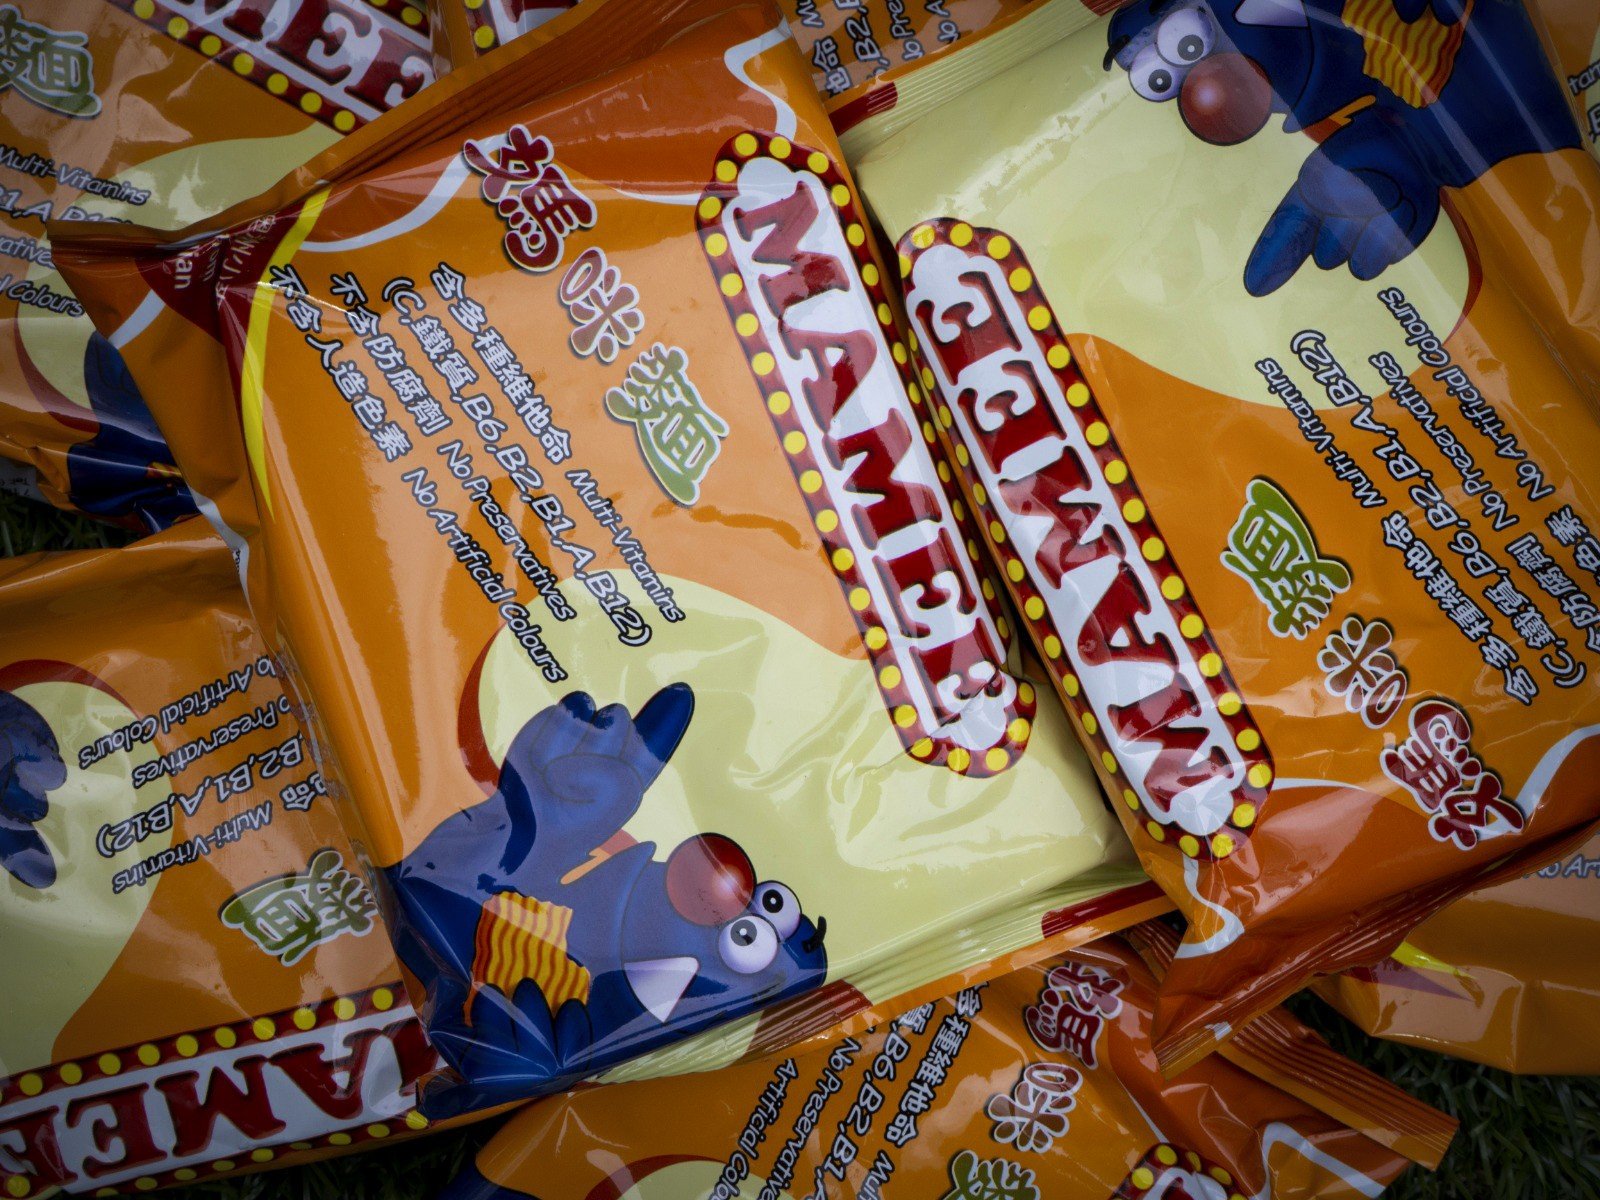 Mamee Monster snacks are a hit with children around the world.